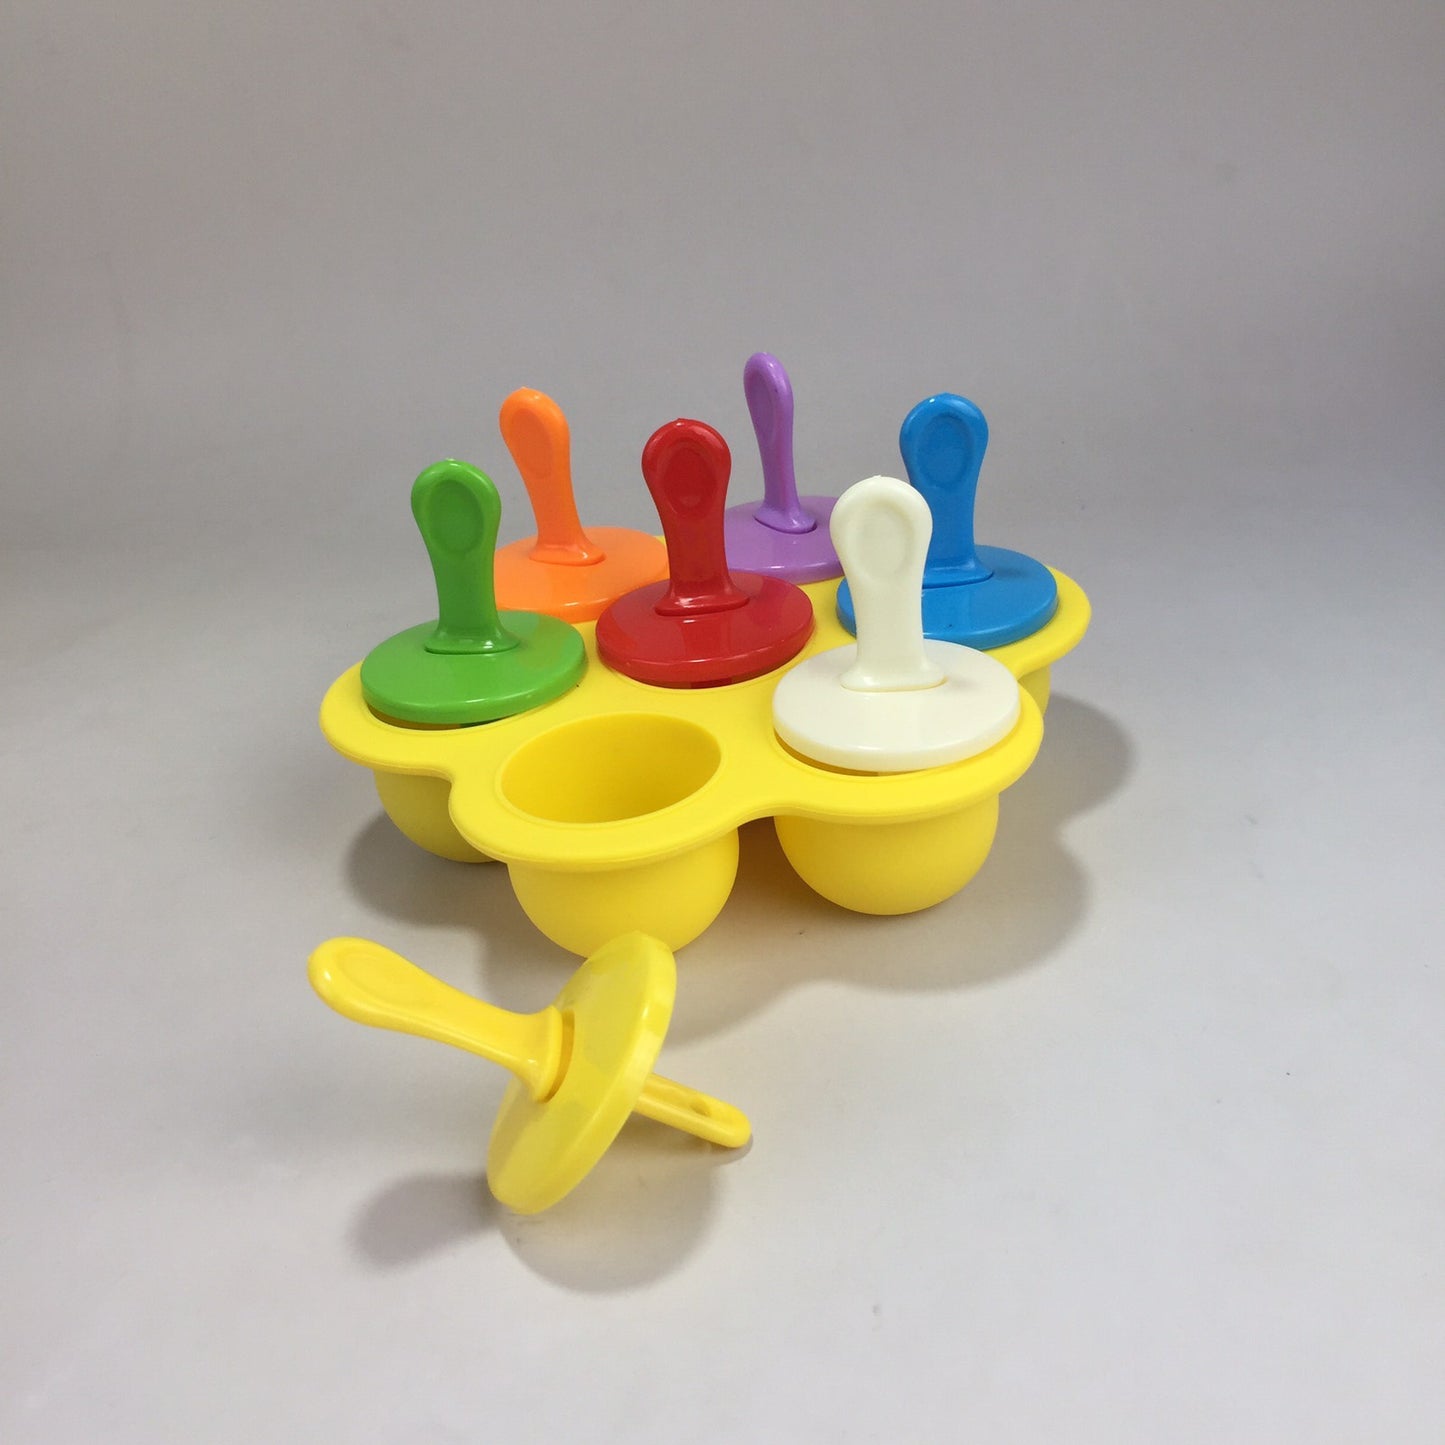 Popsicle Mold or Ice Drop Maker